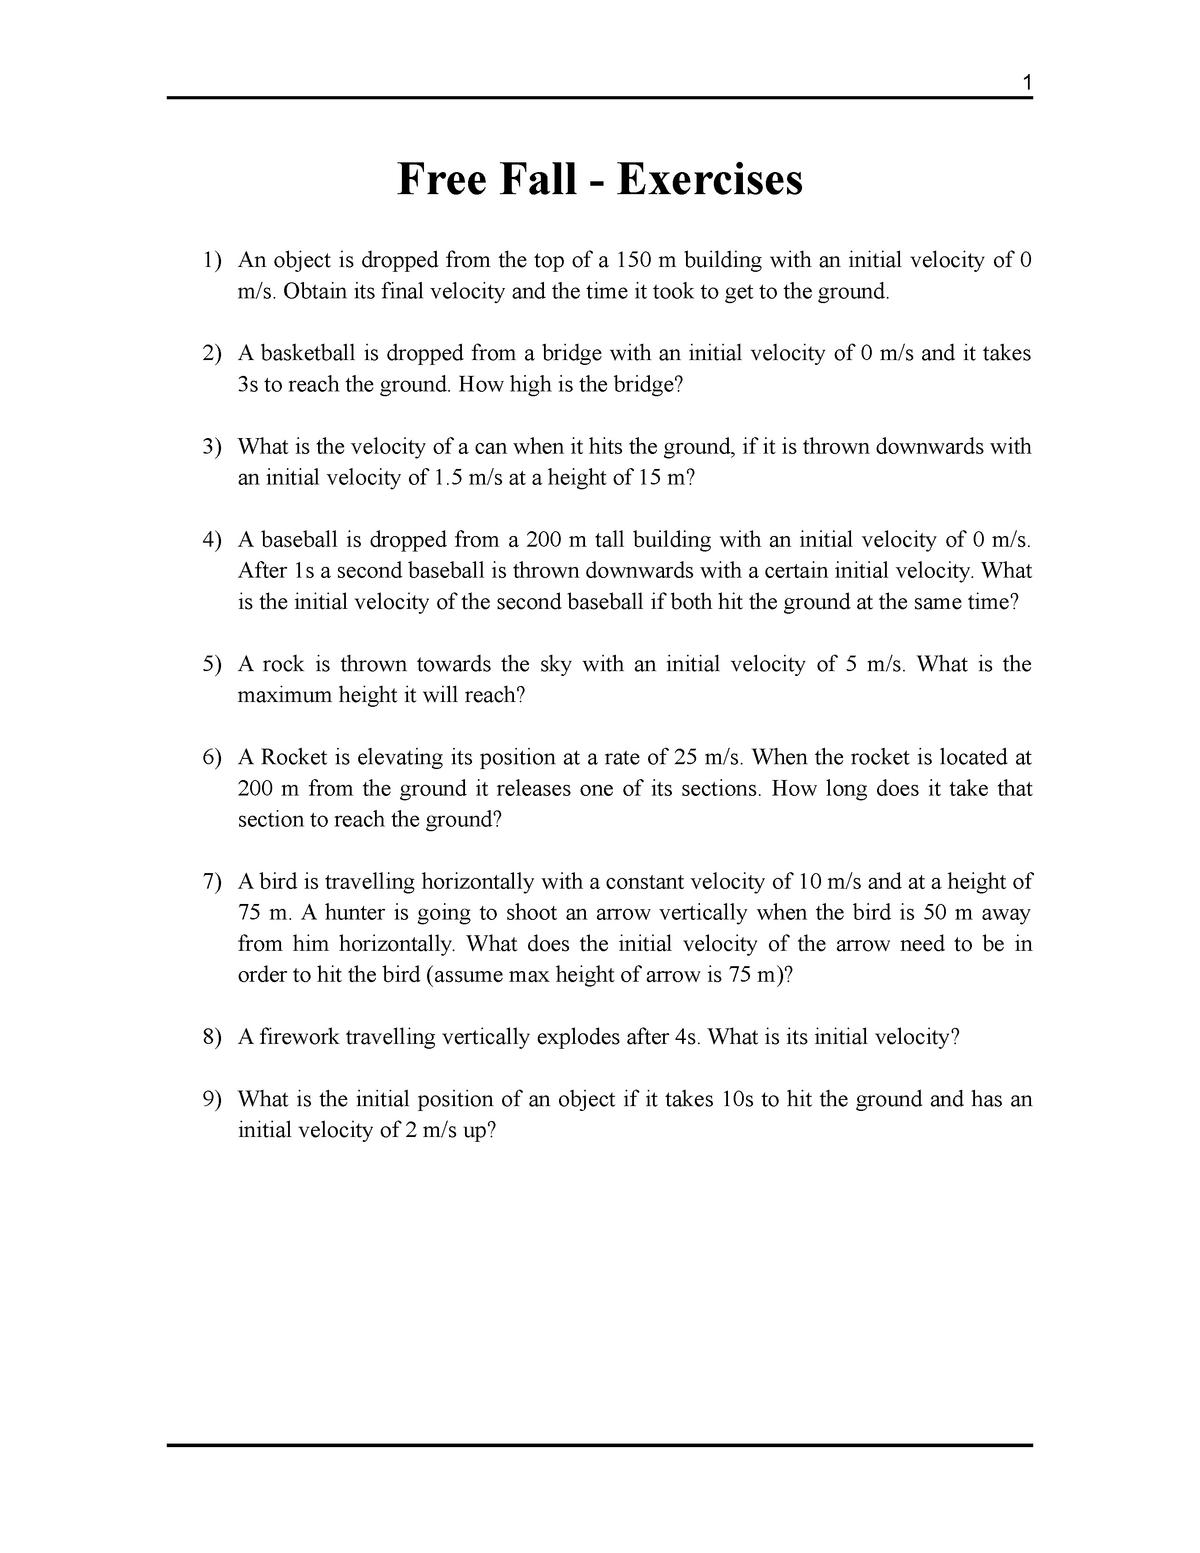 exercises-free-fall-exercise-sheets-with-practice-problems-1-free